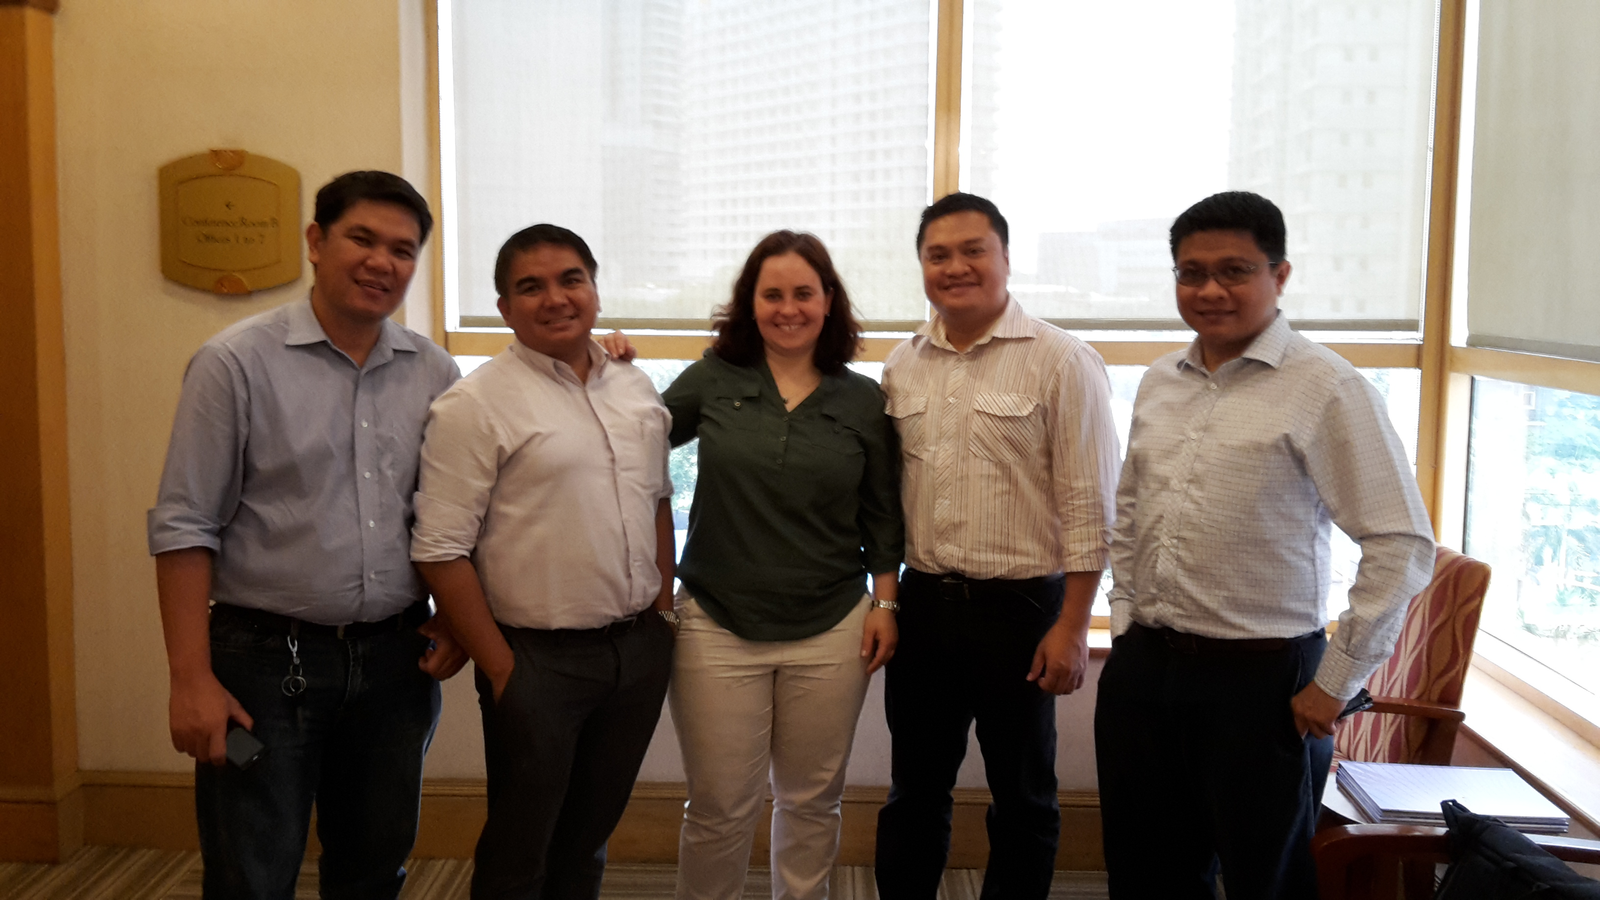 Local sales manager Glenn Ferriol DVM and Global Business development manager Radka Borutova DVM, PhD hosted an intensive training for Enovet's sales staff in the Philippines.